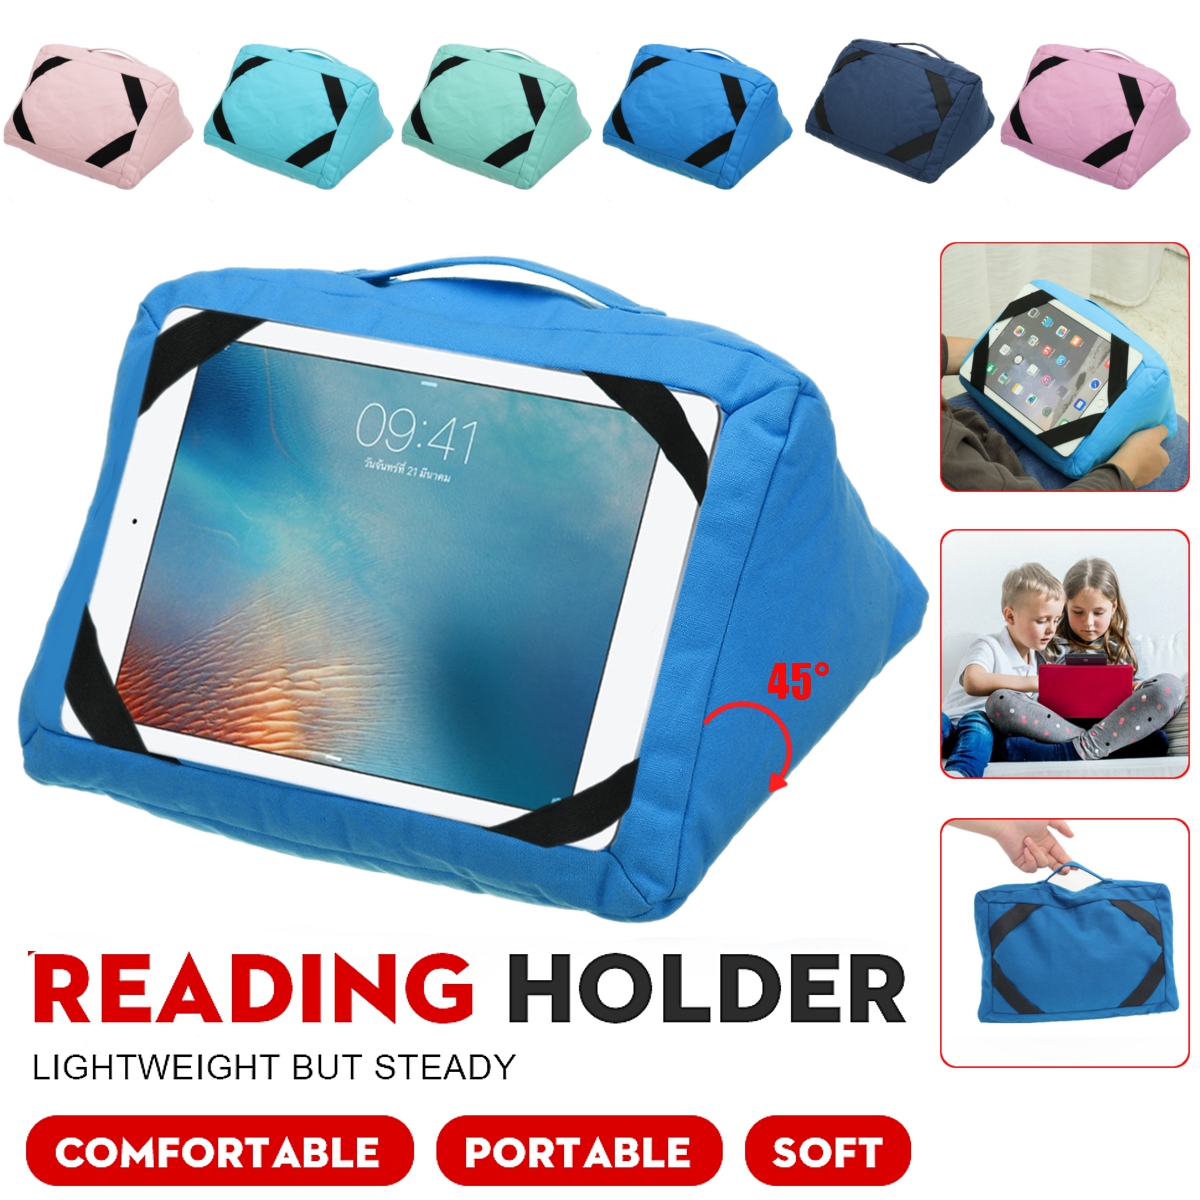 Pillow-Holder-Tablet-Smartphone-Holder-Soft-Pillow-Cushion-Soft-Tablet-Stand-For-Home-Decoration-1827877-1